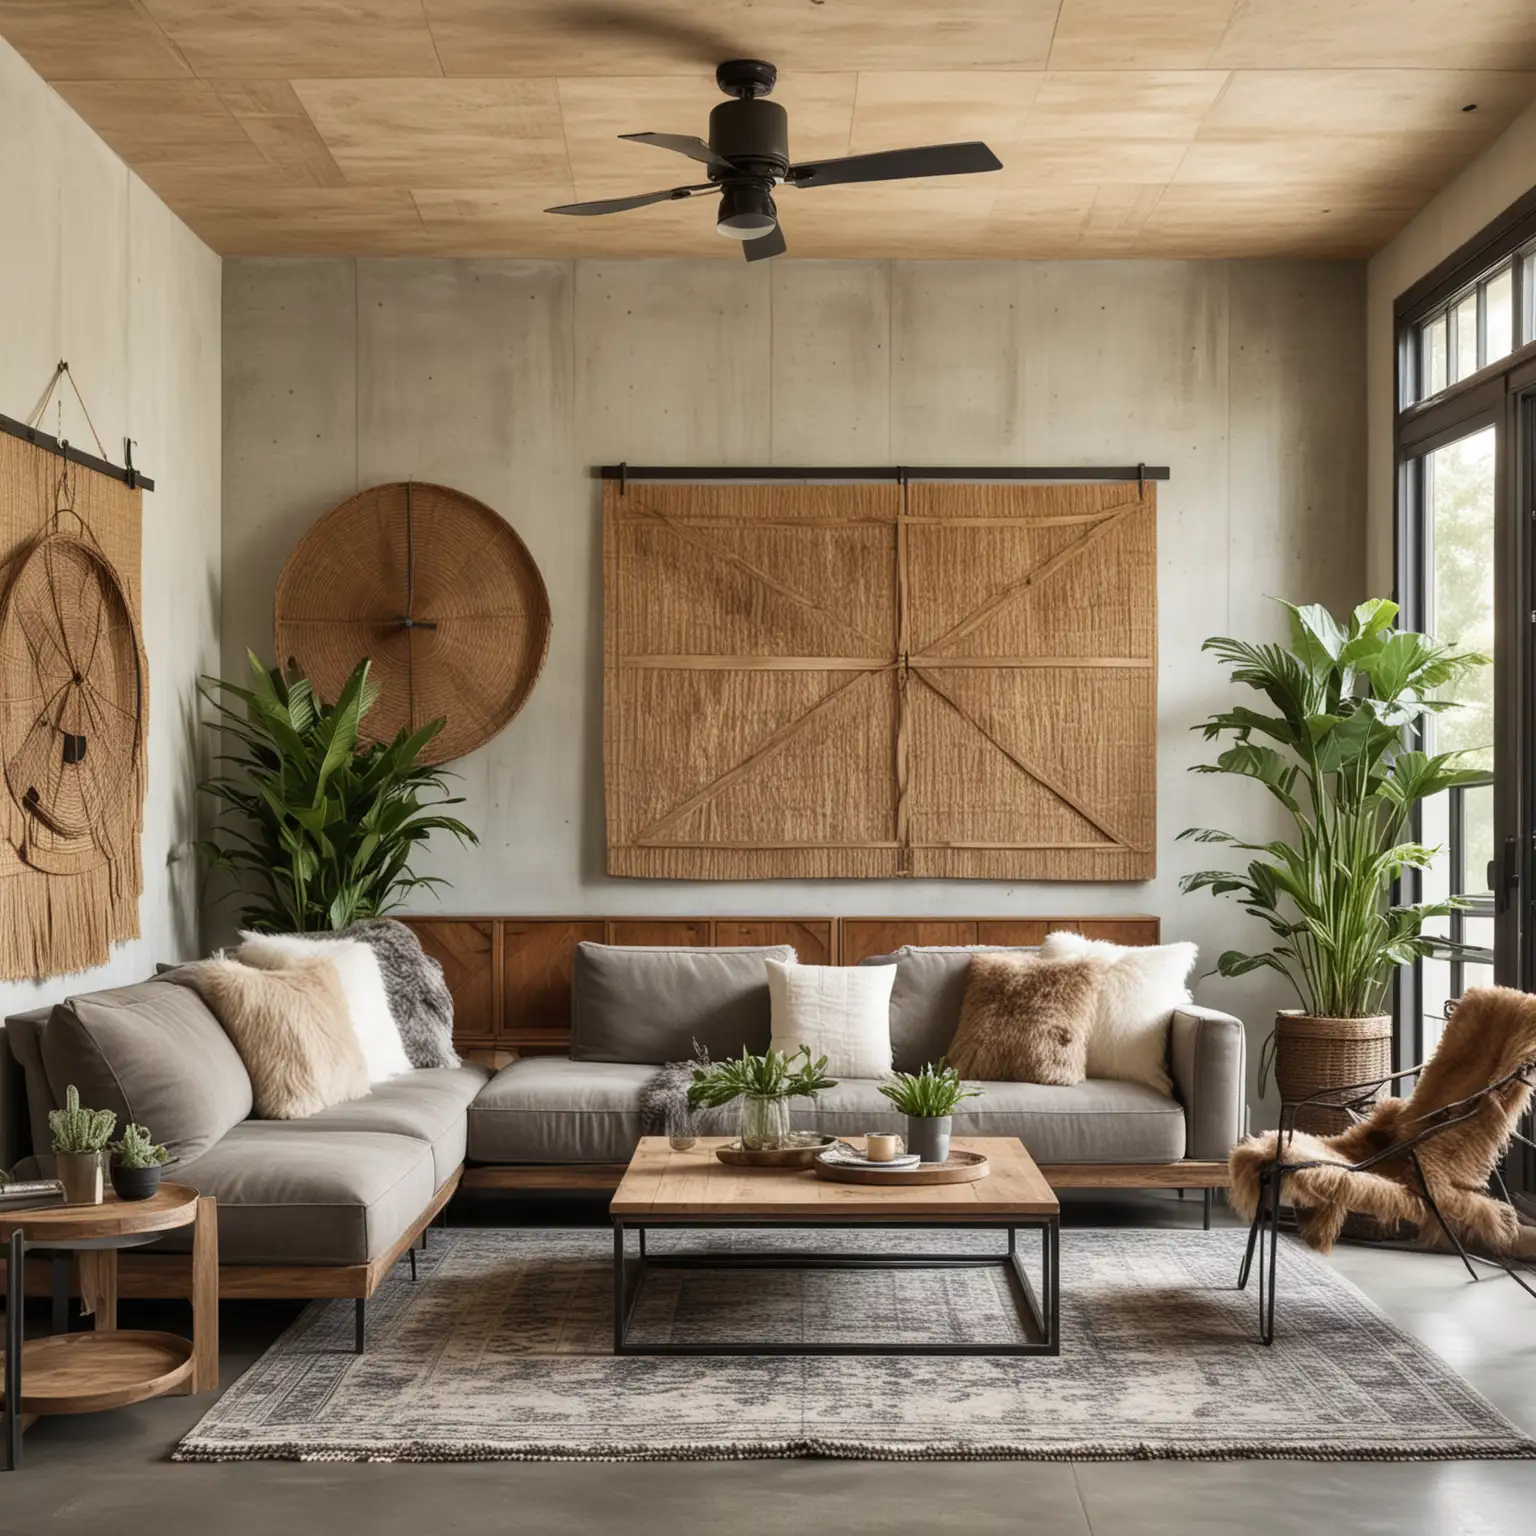 A modern rustic living room with sleek lines and natural materials. The space features a mix of wooden and metal furniture, a concrete floor with a large area rug, and floor-to-ceiling windows with black frames. The room includes a comfortable sectional sofa with faux fur pillows, a wooden coffee table with metal legs, and minimalist decor. A large metal wall art piece in the shape of a barn adds a rustic touch, while potted plants and wicker baskets bring in natural elements. A ceiling fan with wooden blades and a woven wall hanging complete the look.